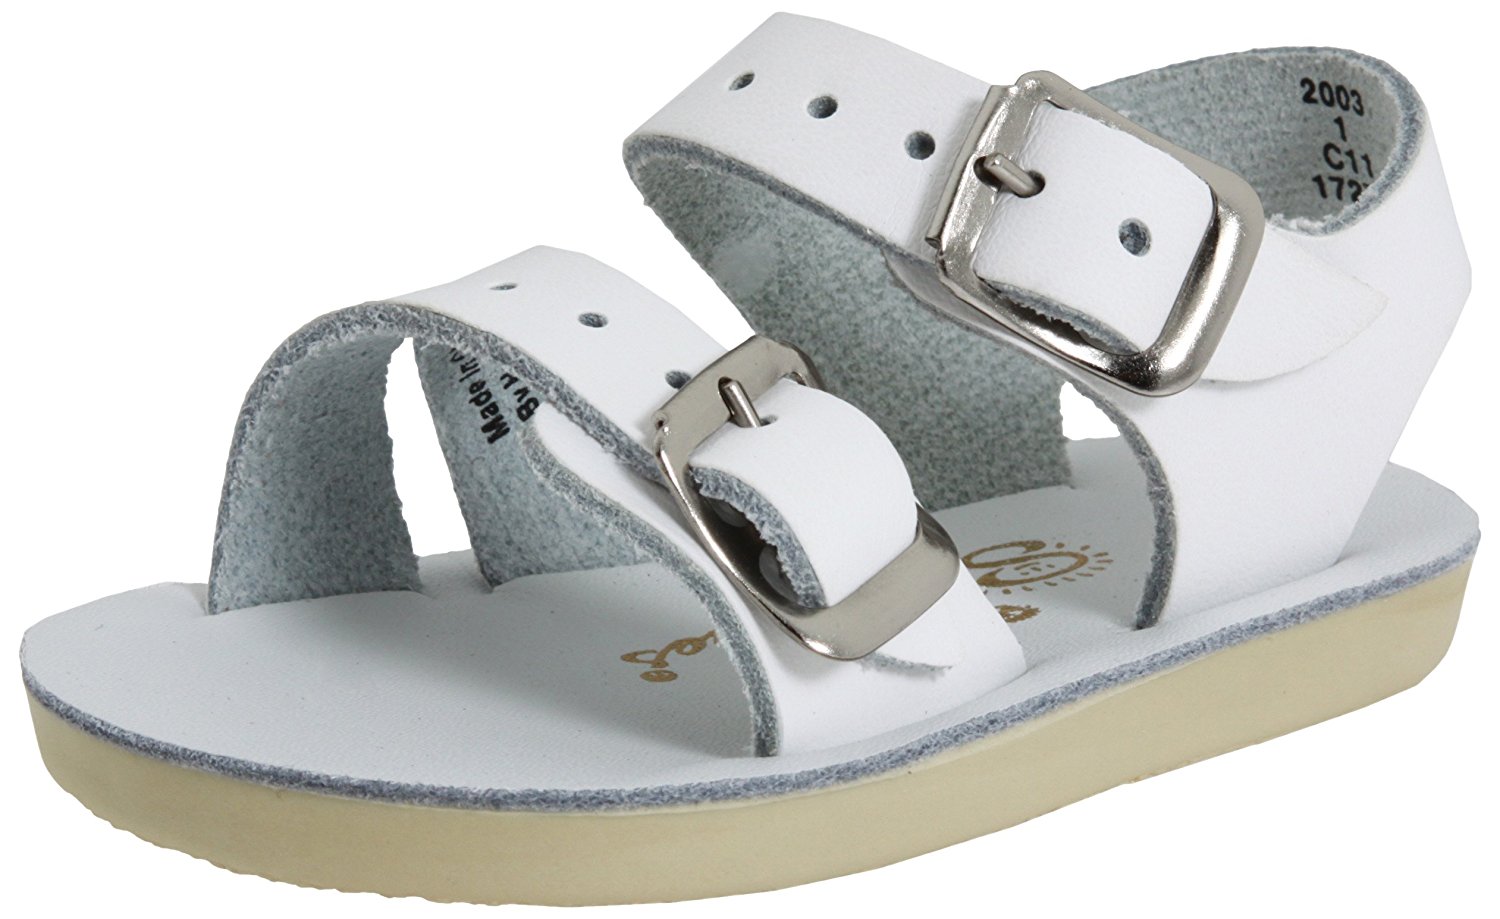 Salt Water Sandals by Hoy Sea Wees - White - 4 Toddler